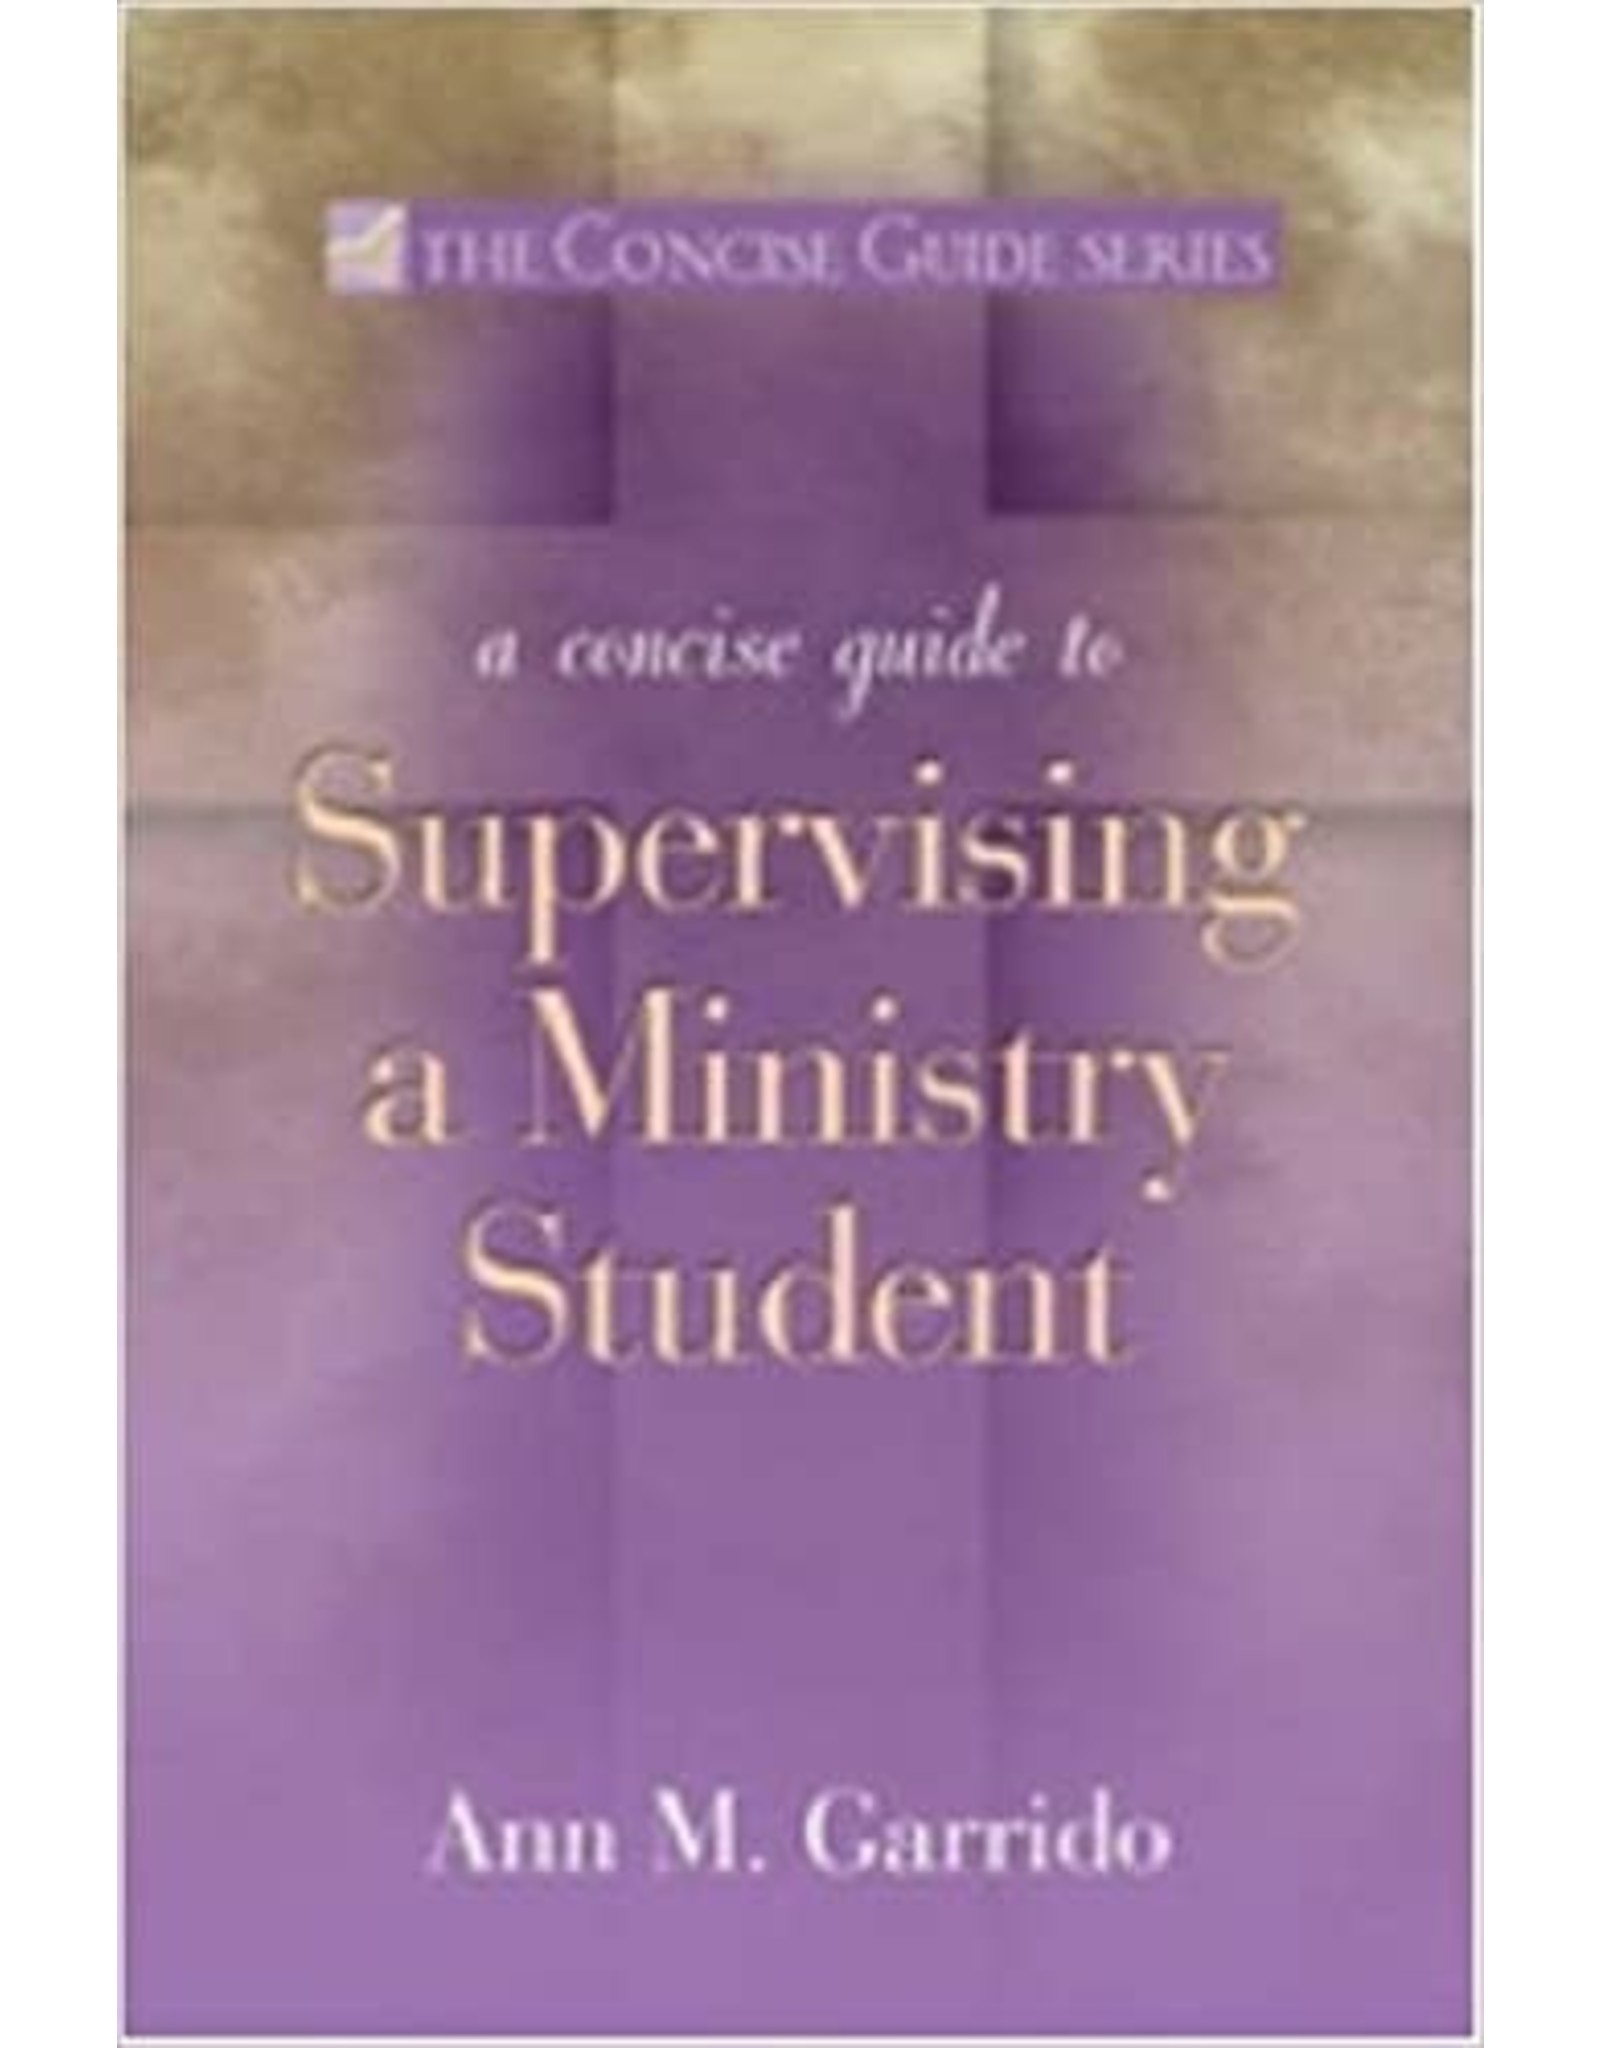 A Concise Guide to Supervising a Ministry Student